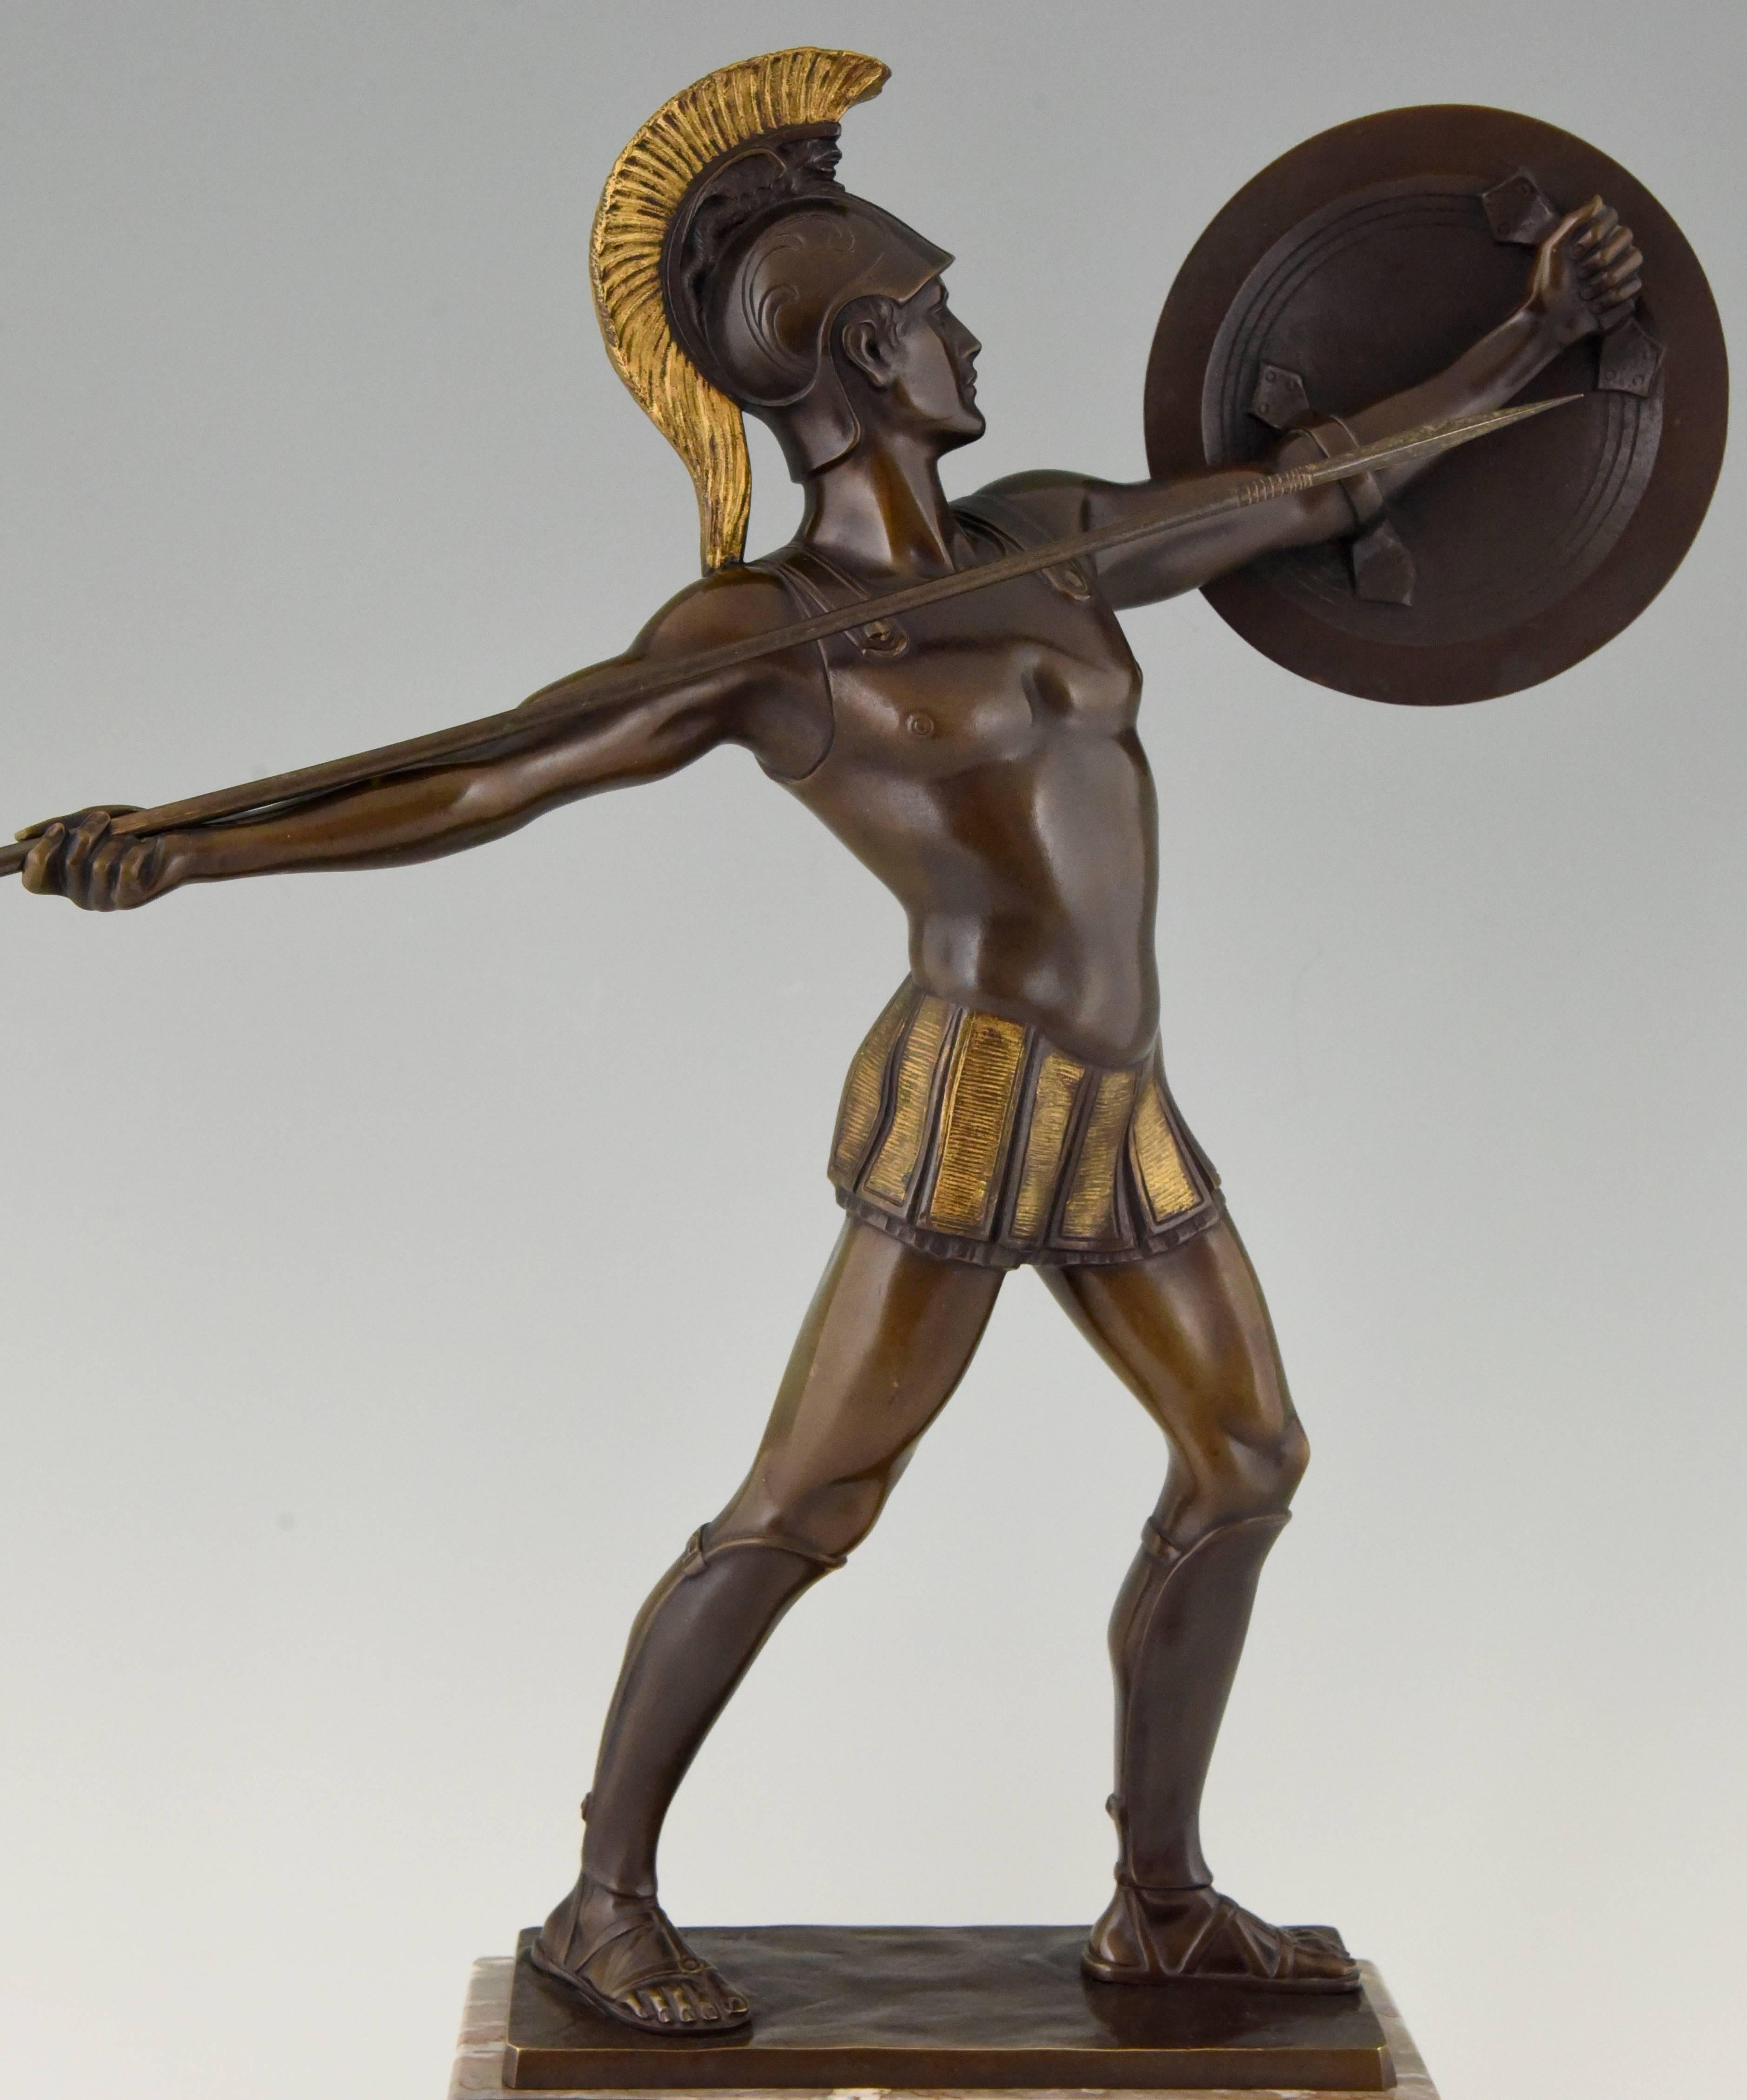 Beautiful bronze sculpture of a Roman warrior with spear and helmet on a marble plinth.

Artist/ maker: H. J. Rieder
Signature/ marks: H. Rieder.
Style: Art Deco.
Date: 1920.
Material: Patinated bronze. Marble base.
Origin: Germany.
Size: H